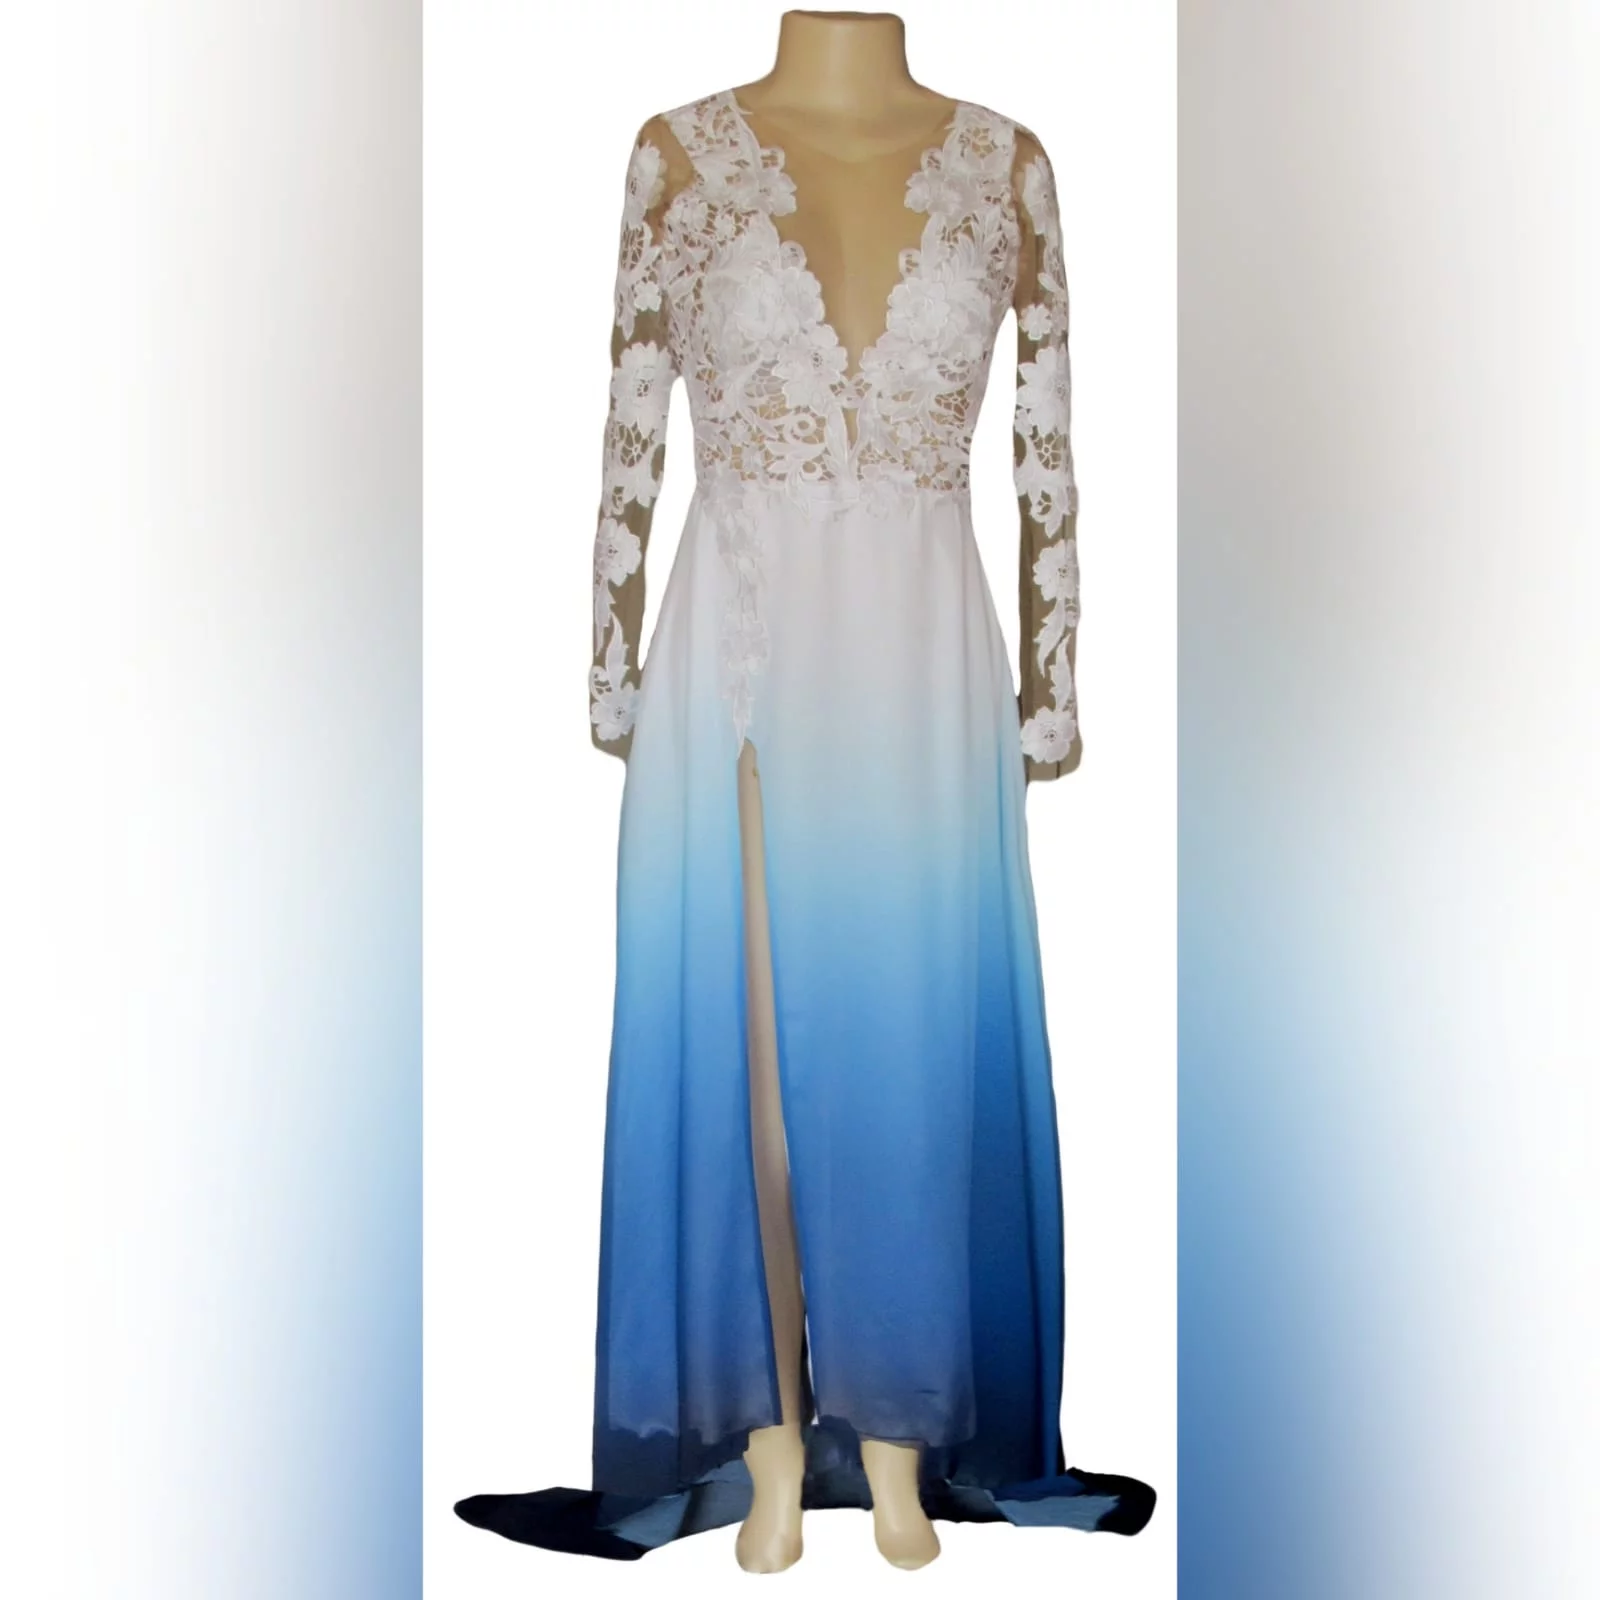 Gorgeous blue and white ombre flowy ceremony dress 4 a gorgeous blue and white ombre flowy ceremony dress created for a prom night. With a classy white bodice with elegant illusion lace sleeves. With a slit and a train